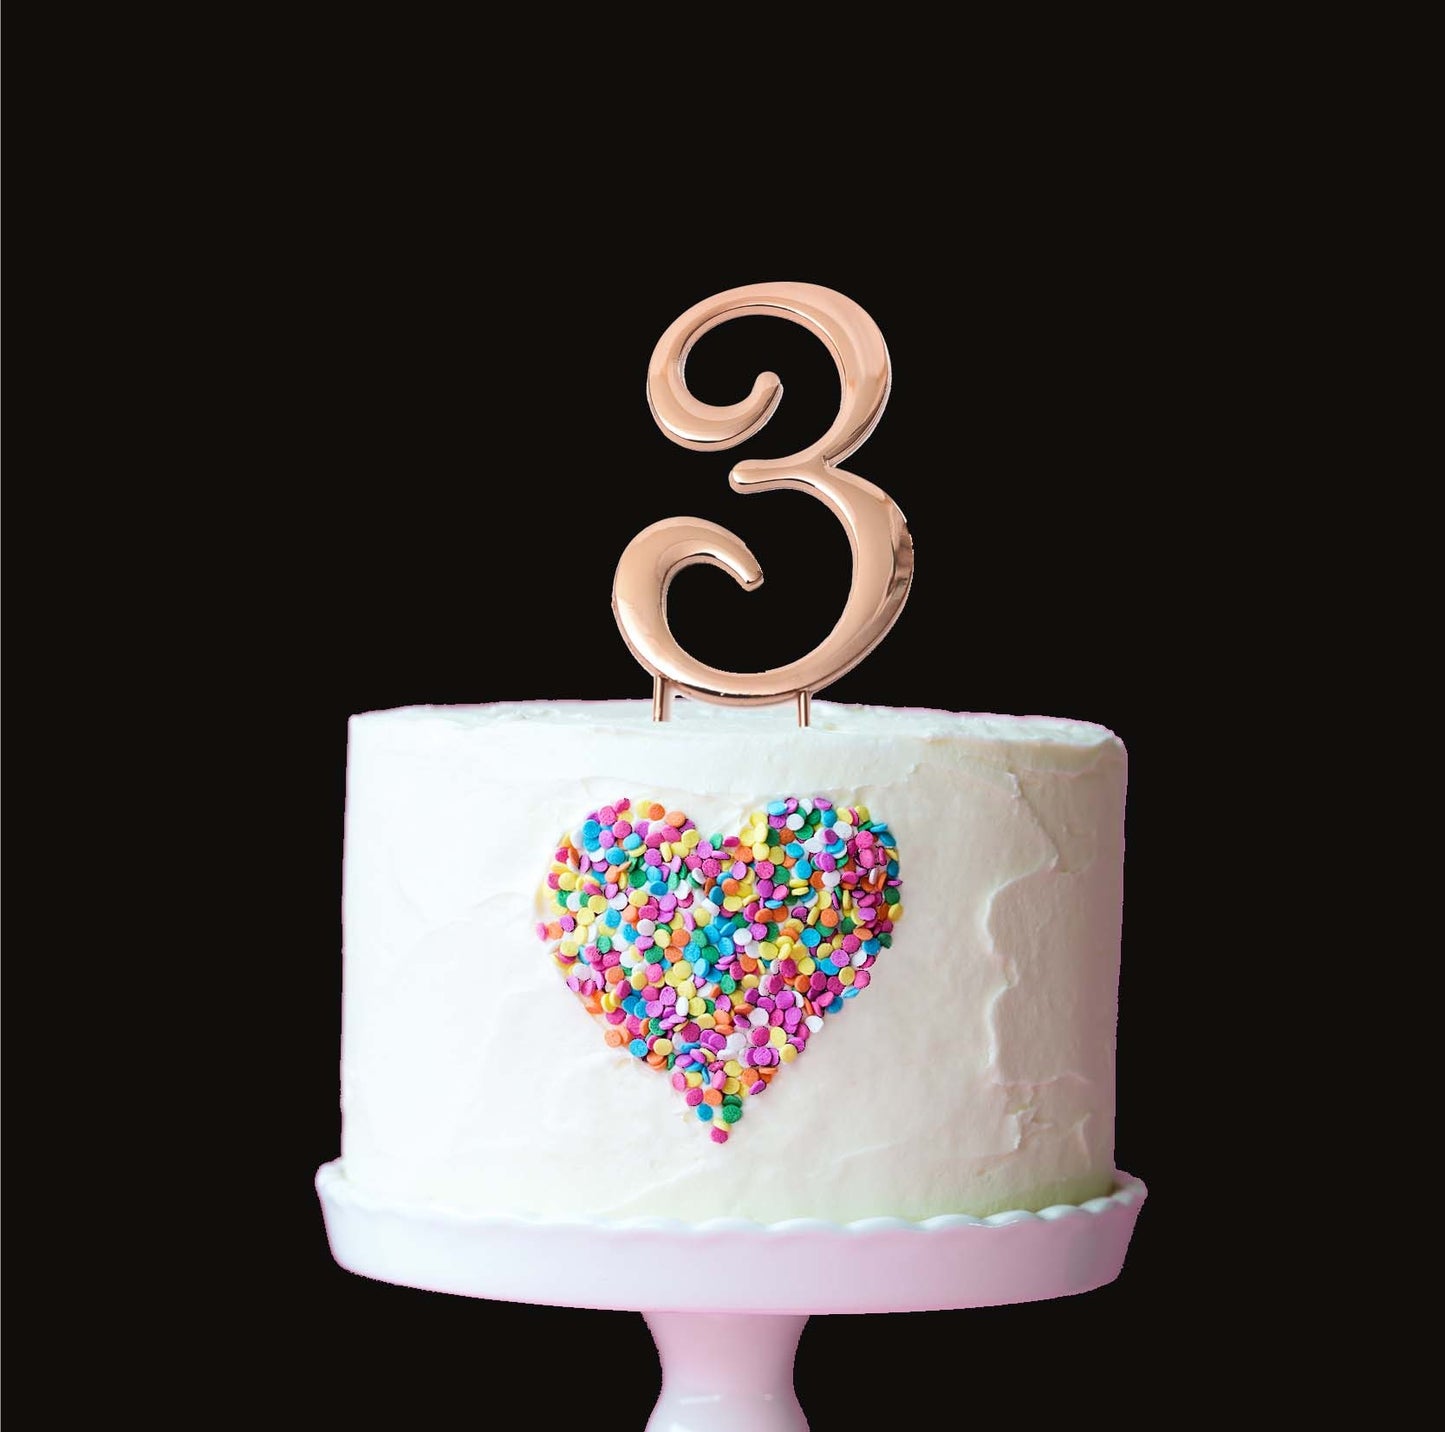 Rose Gold metal numeral 3 cake topper pick